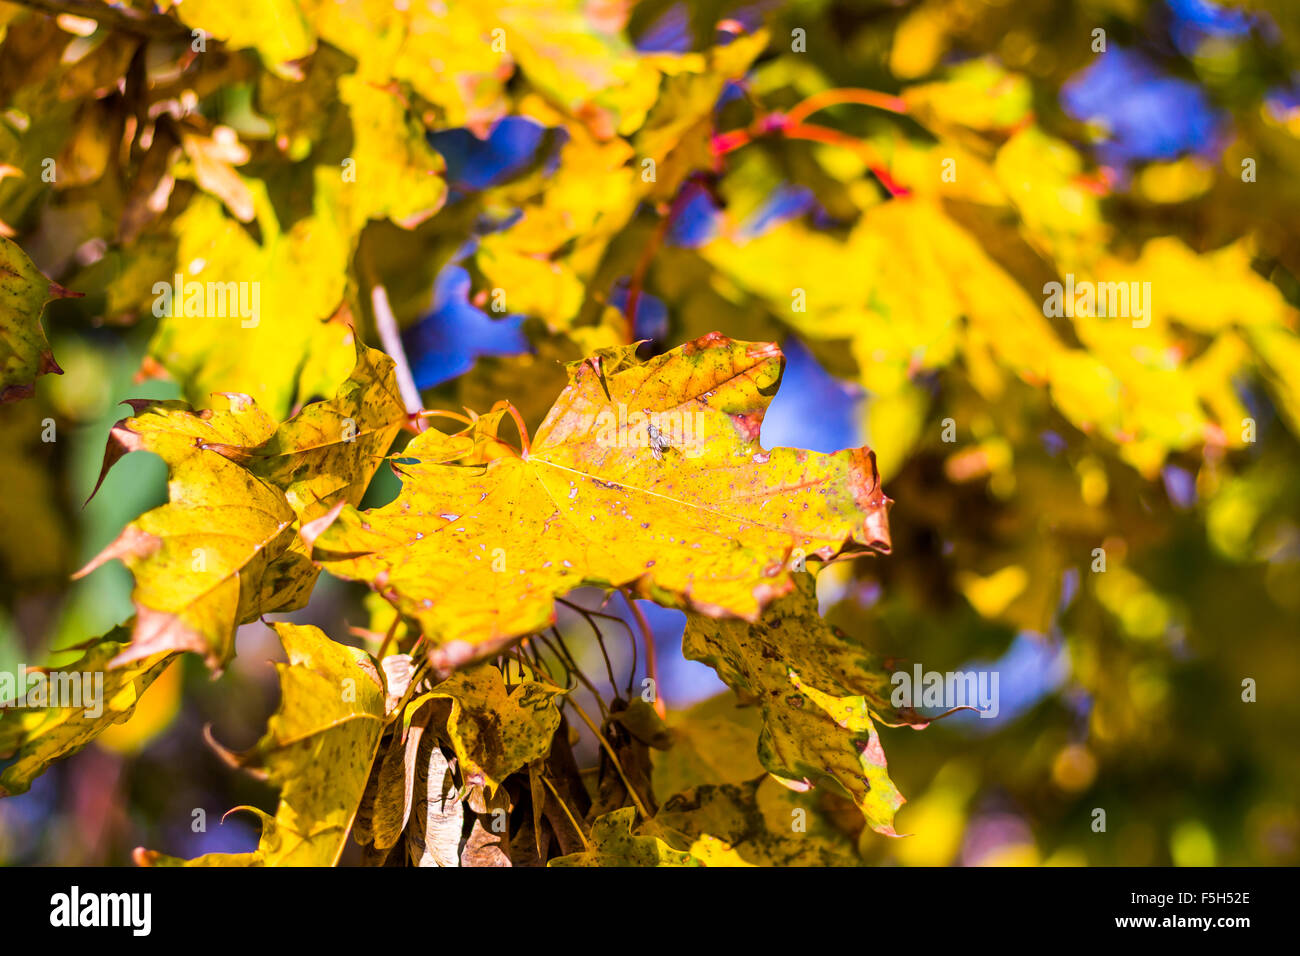 Abstract autumn background, old orange leaves, dry tree foliage, soft focus, autumnal season, changing of nature, bright sunligh Stock Photo